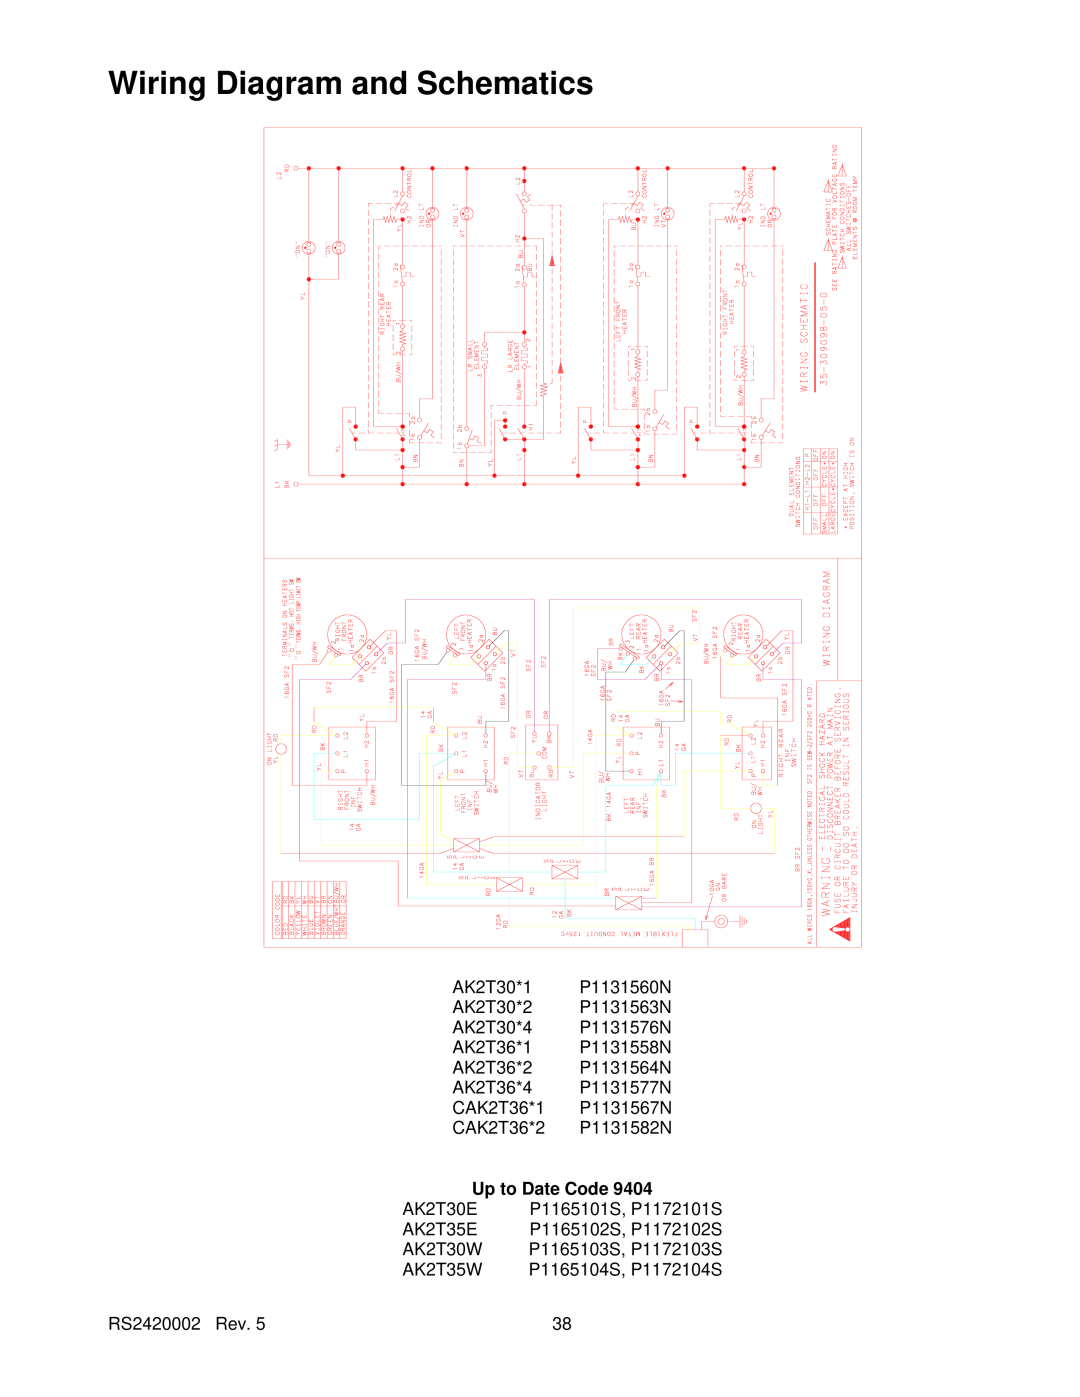 Amana AK2T30/36E1/W1, AK2H30, AK2H36E2, AK2HW2 service manual Wiring Diagram and Schematics, Up to Date Code 